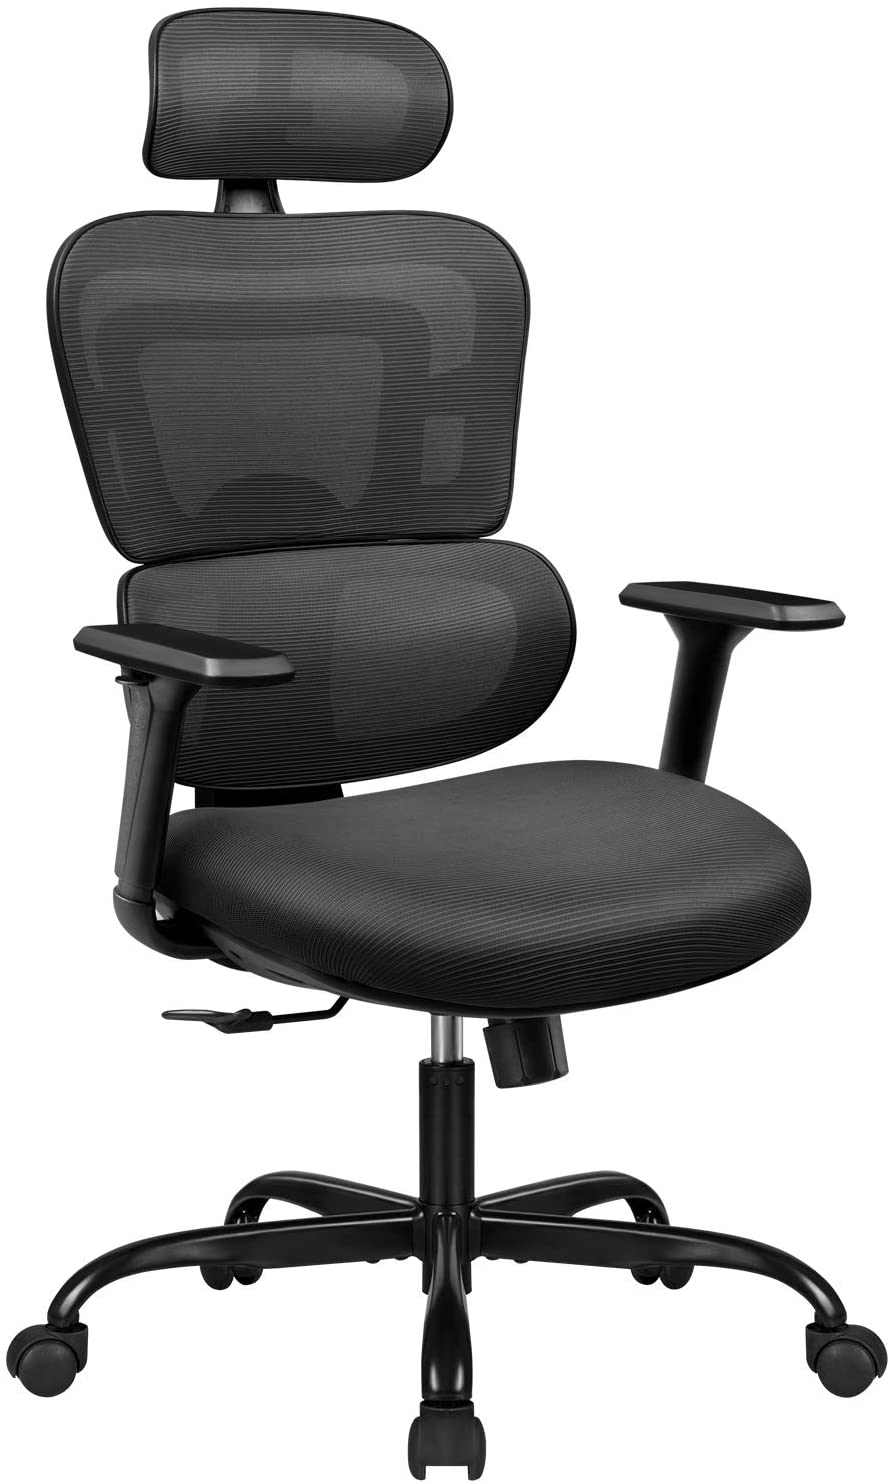 Ergonomic Office Chair Computer Desk Chair Mesh Fabric High Back Swivel Chair with Adjustable Headrest and Armrests Executive Rolling Chair with Curved Lumbar Support (Black)